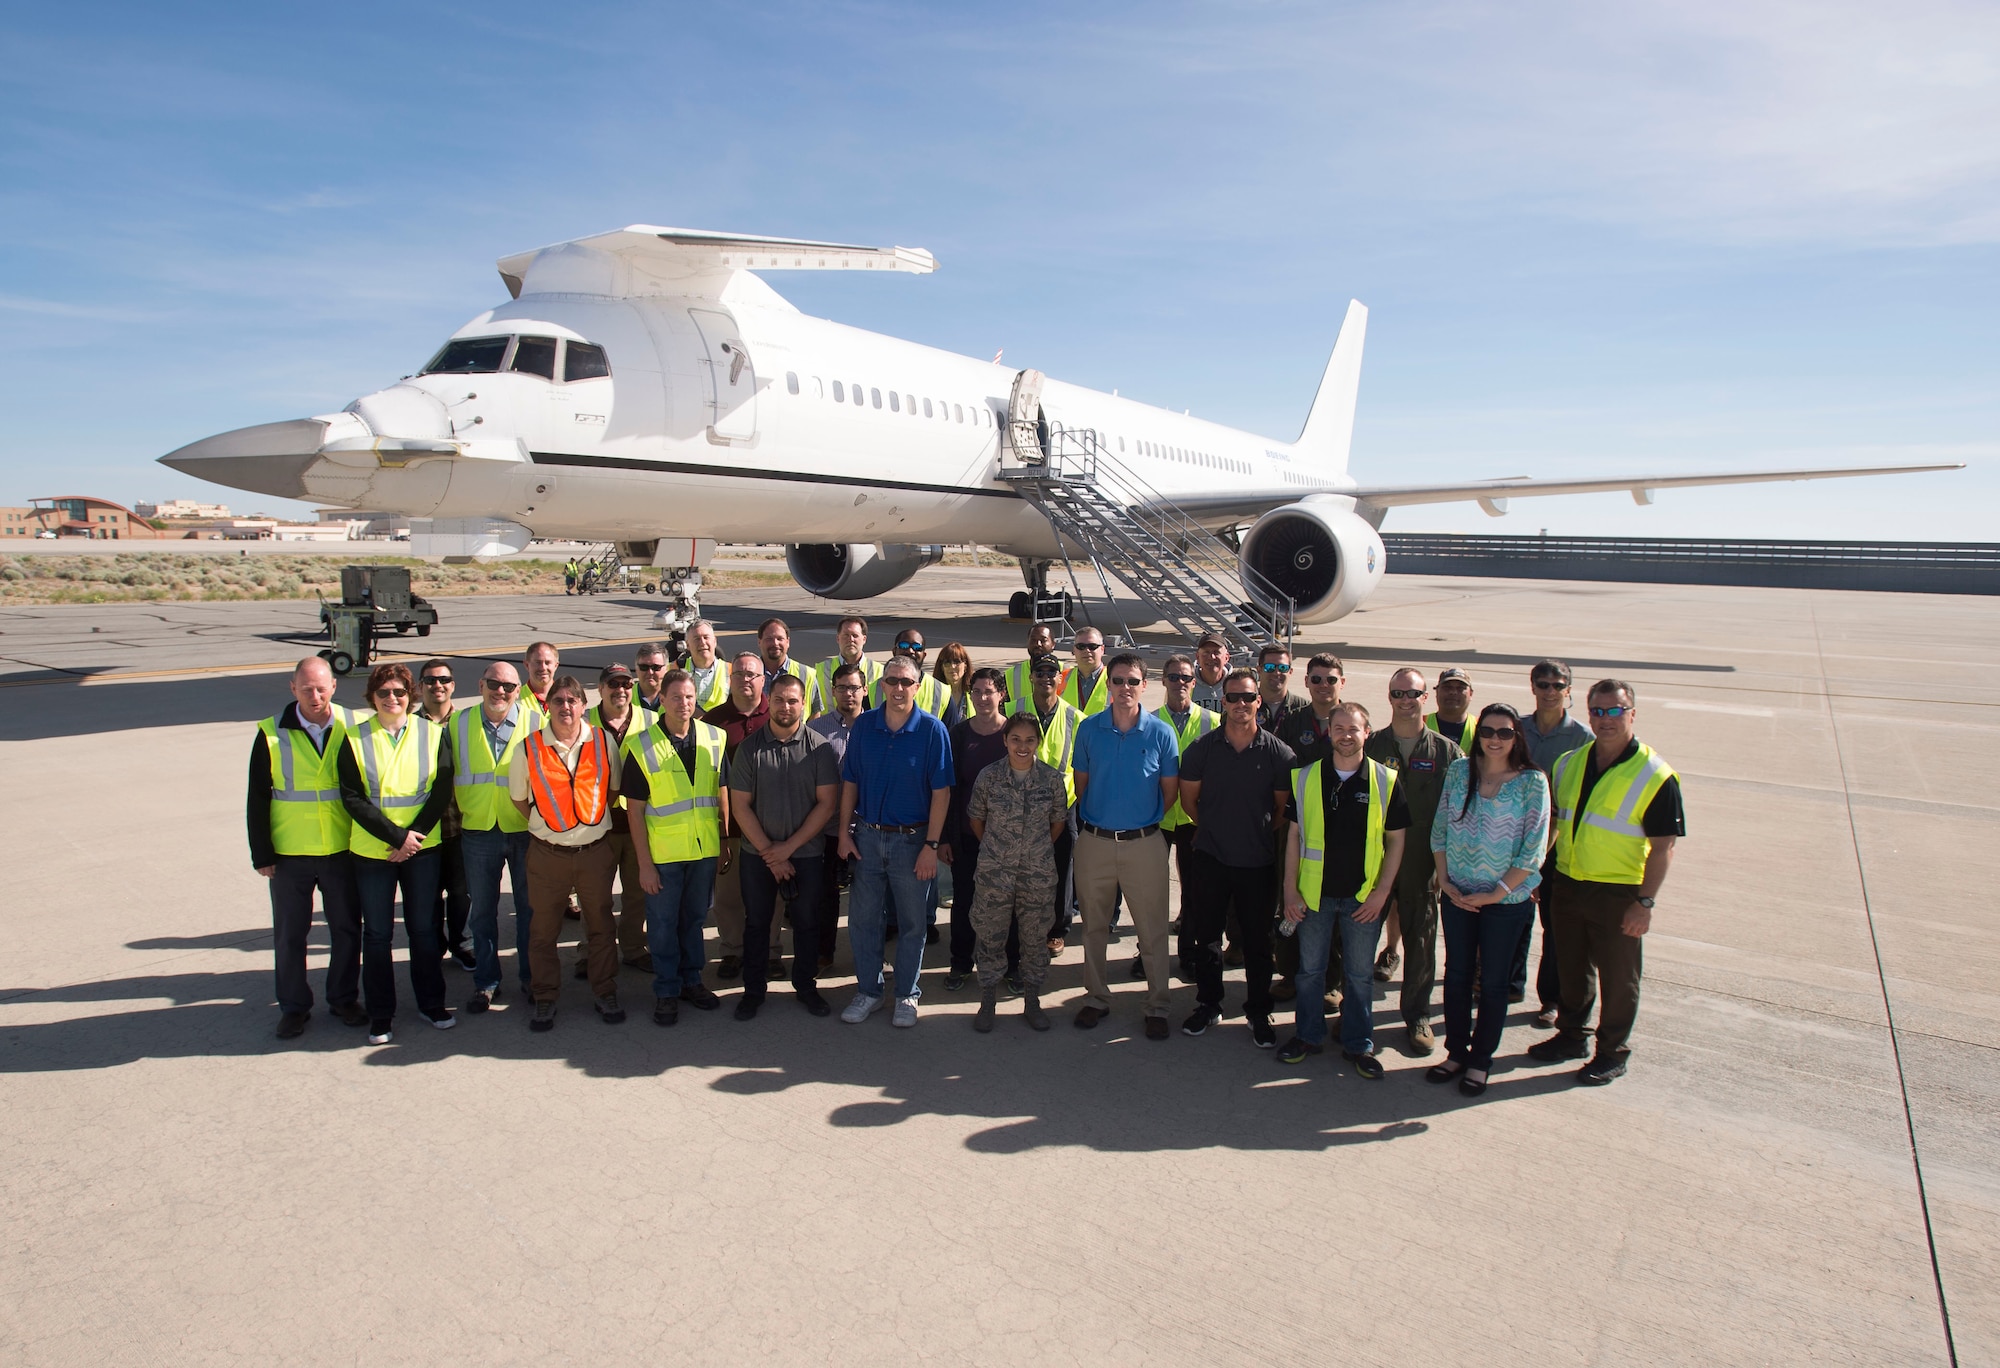 Members of the F-22 Flying Test Bed team pose for a photo in front of the highly modified Boeing 757 May 3. The FTB routinely flies with real Raptors both at Edwards and Nellis Air Force Base, Nevada in order to gain an early look at F-22 mission software before the software is released to developmental flight test, mainly at Edwards. The FTB can fly up to 30 crewmembers. (U.S. Air Force photo by Ethan Wagner)